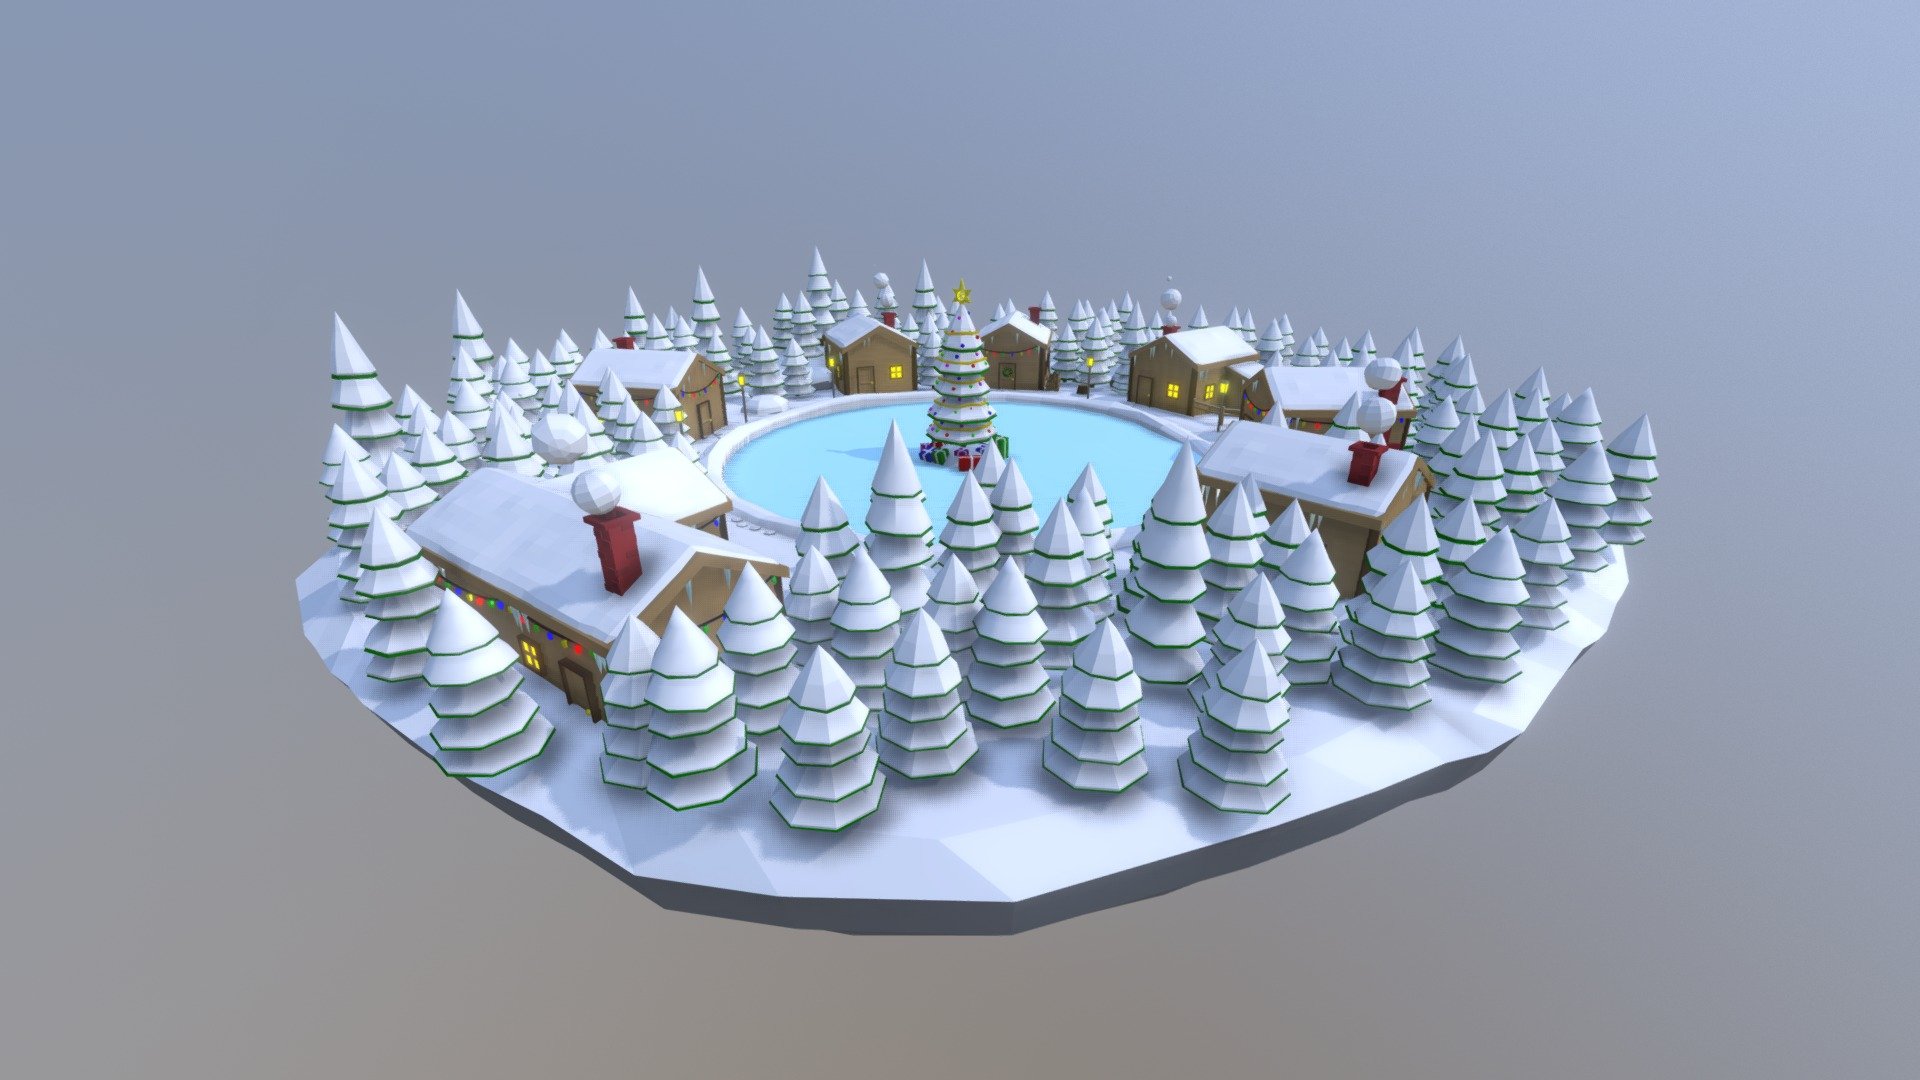 A lowpoly christmas scene I made to study lighting and textures in Redshift. This scene is converted to normal mats for Sketchfab.

The animation is a bit janky on sketchfab for some reason on Sketchfab, so if the lights are glitching out that is why.

The scene is available to download for free if uh.. you want 3d model